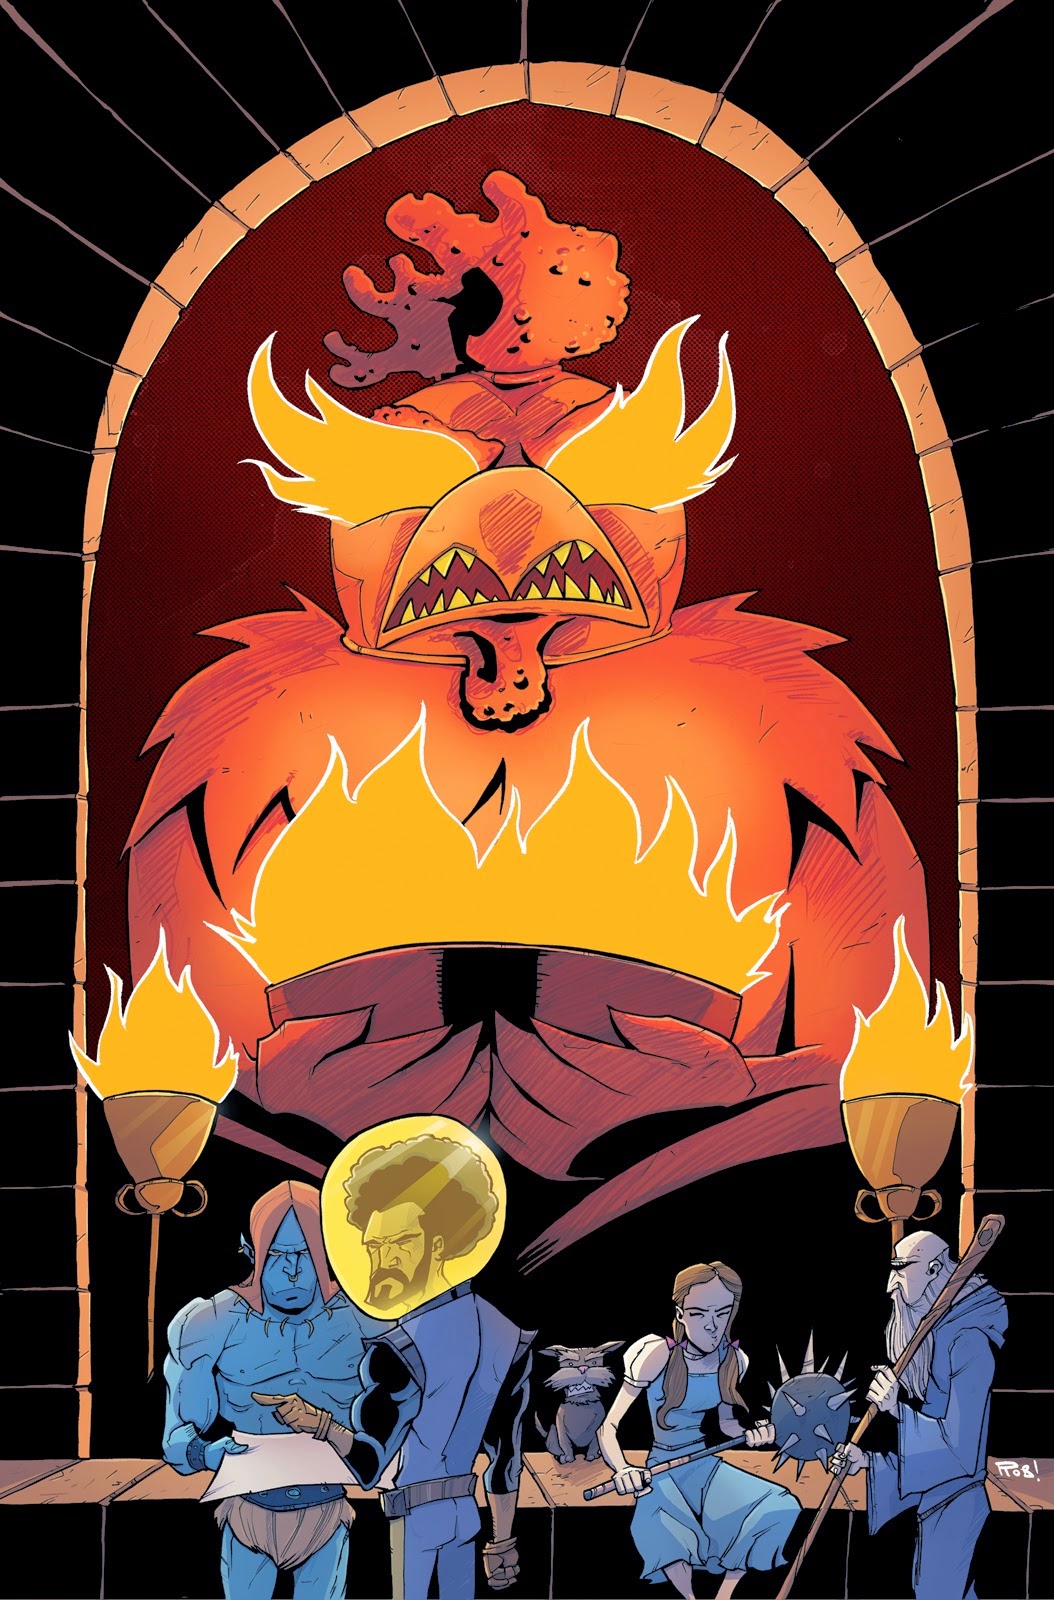 San Diego Comic-Con 2014 Exclusive Chew: Warrior Chicken Poyo #1 Metallic Orange Foil Variant Cover by Rob Guillory